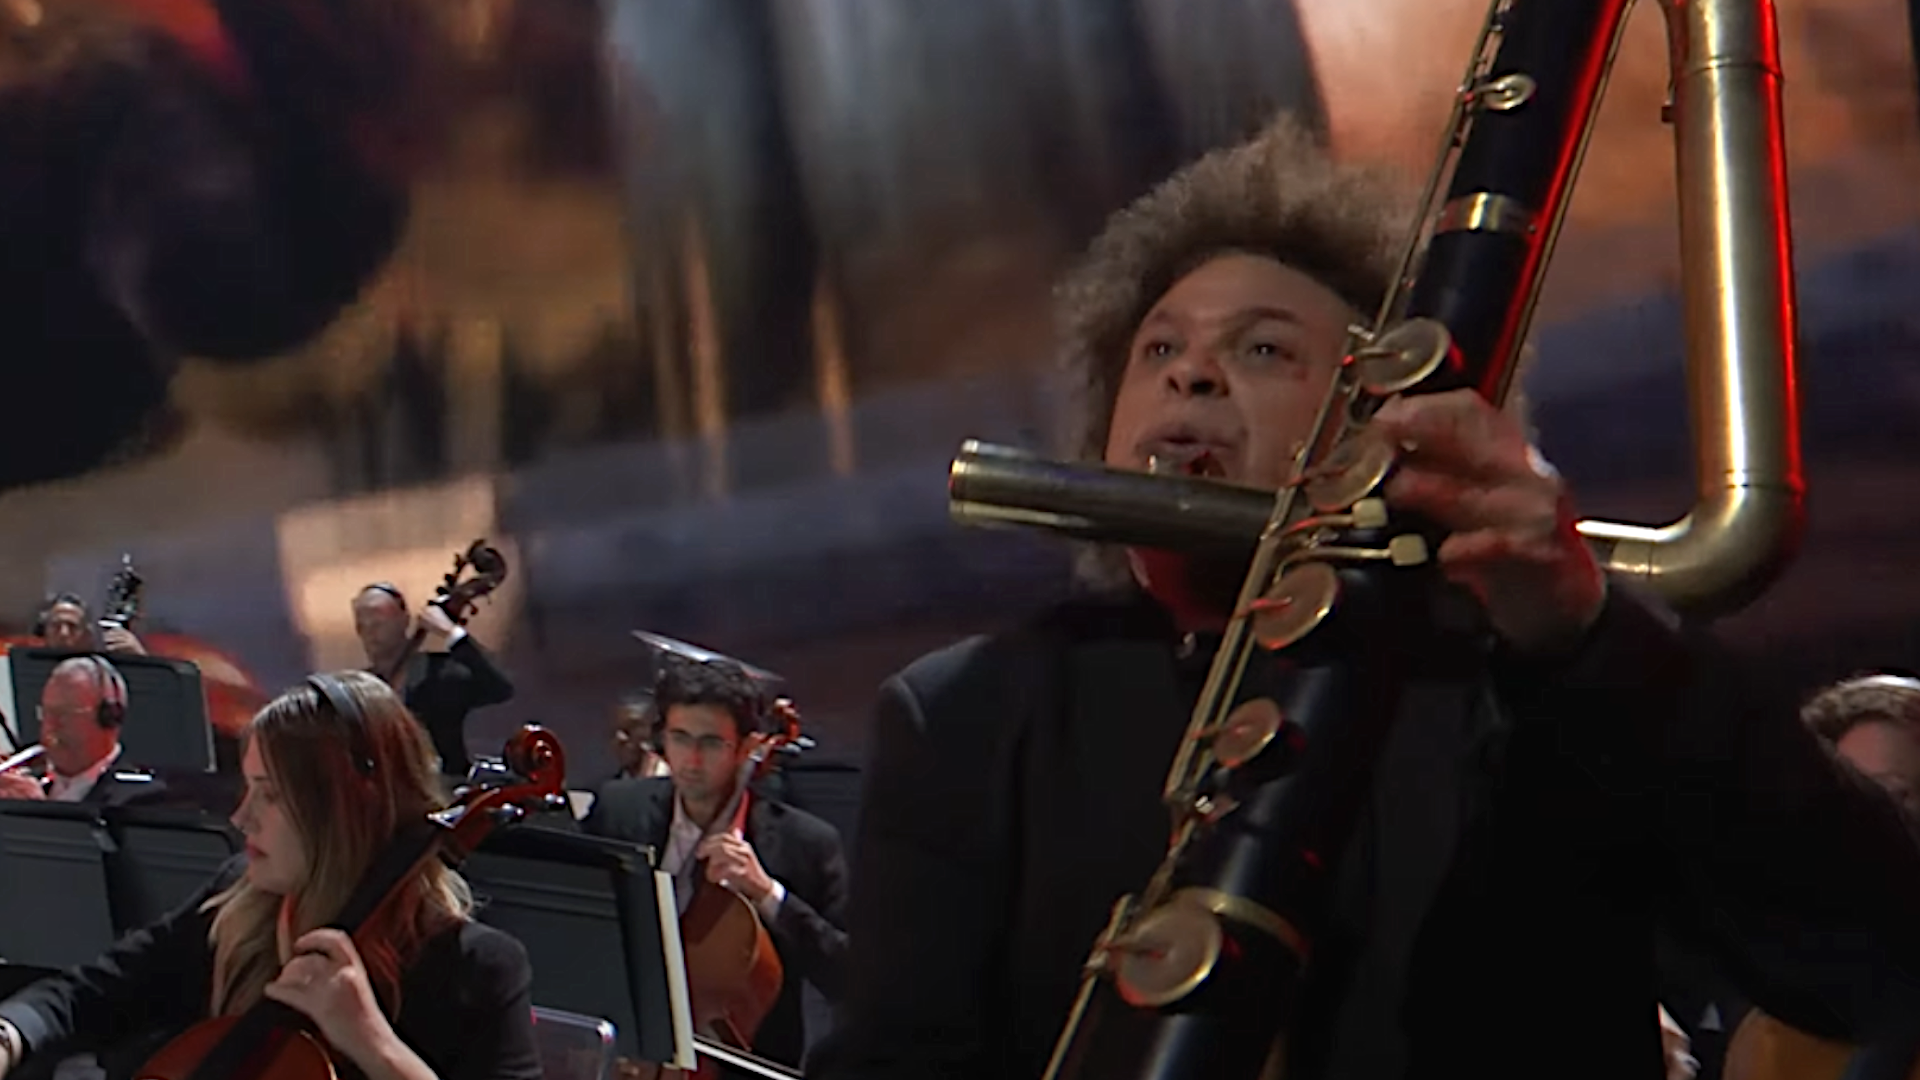 Big-name celebs are fine, but Flute Guy’s return to The Game Awards was the main event